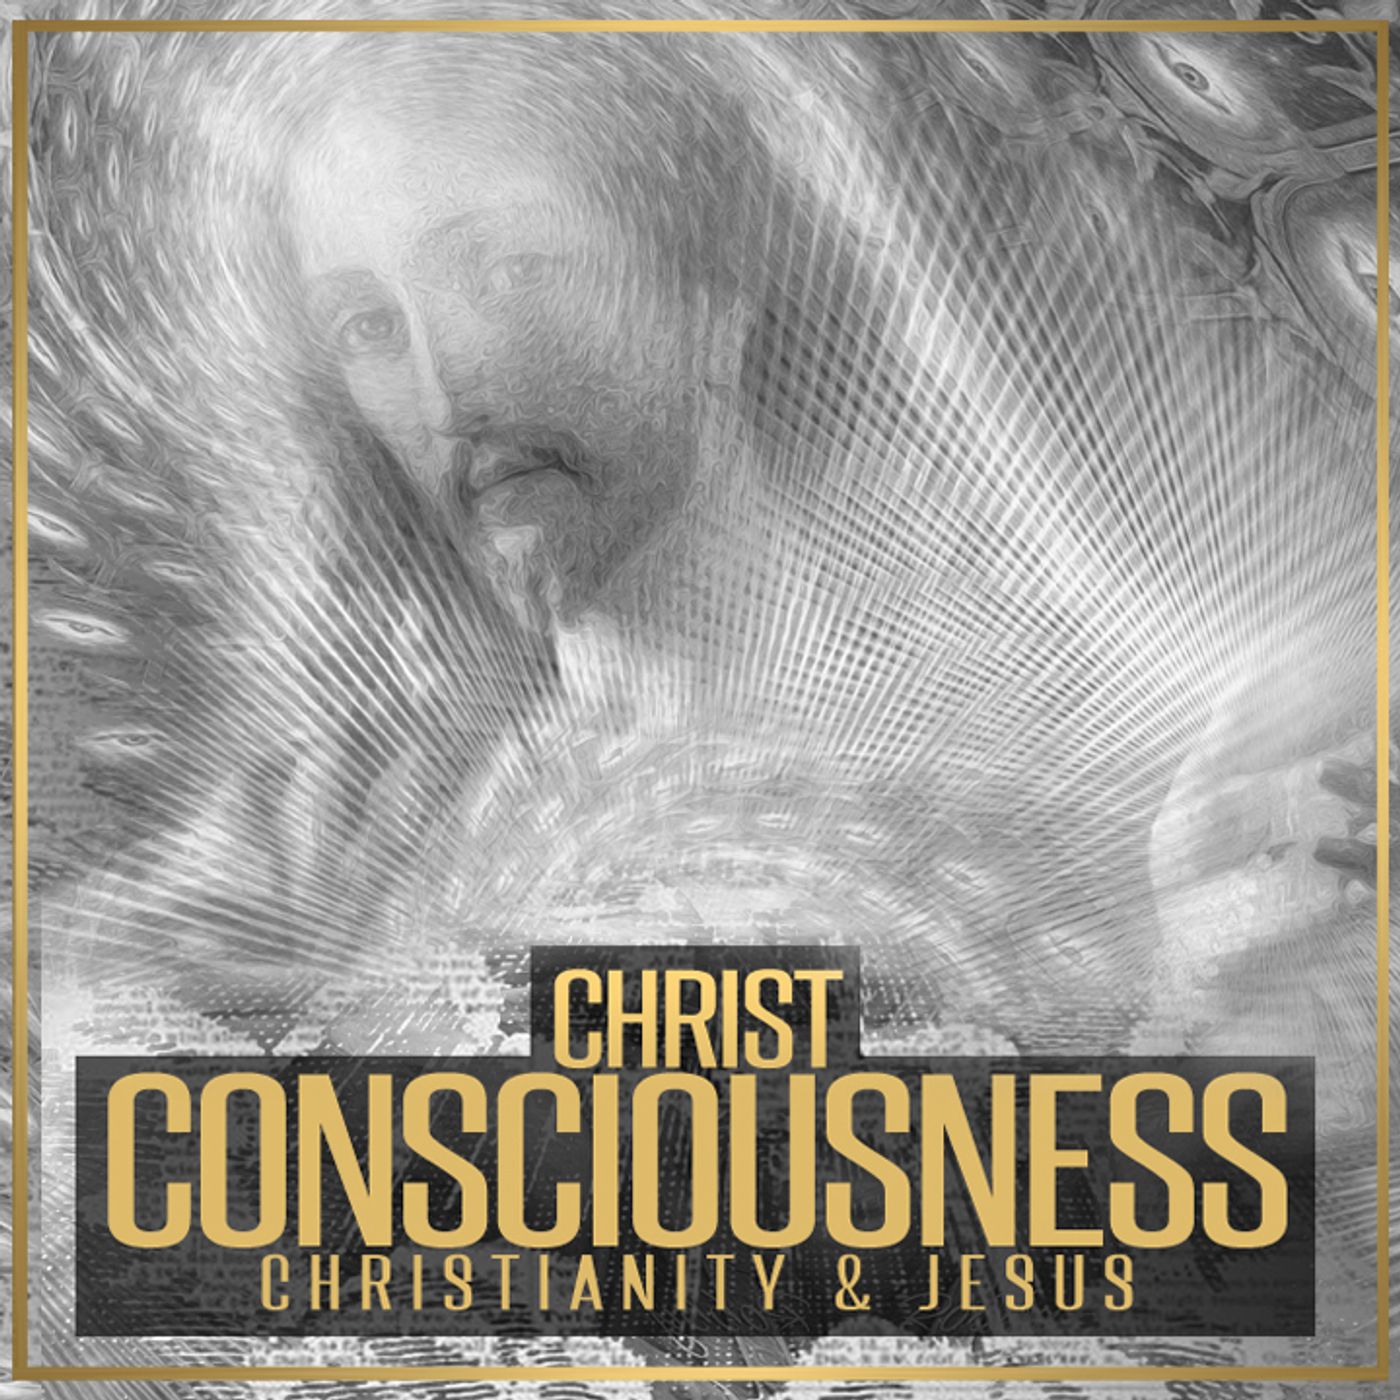 Christ Consciousness, Christianity & The Jesus Connection | TruthSeekah Interview